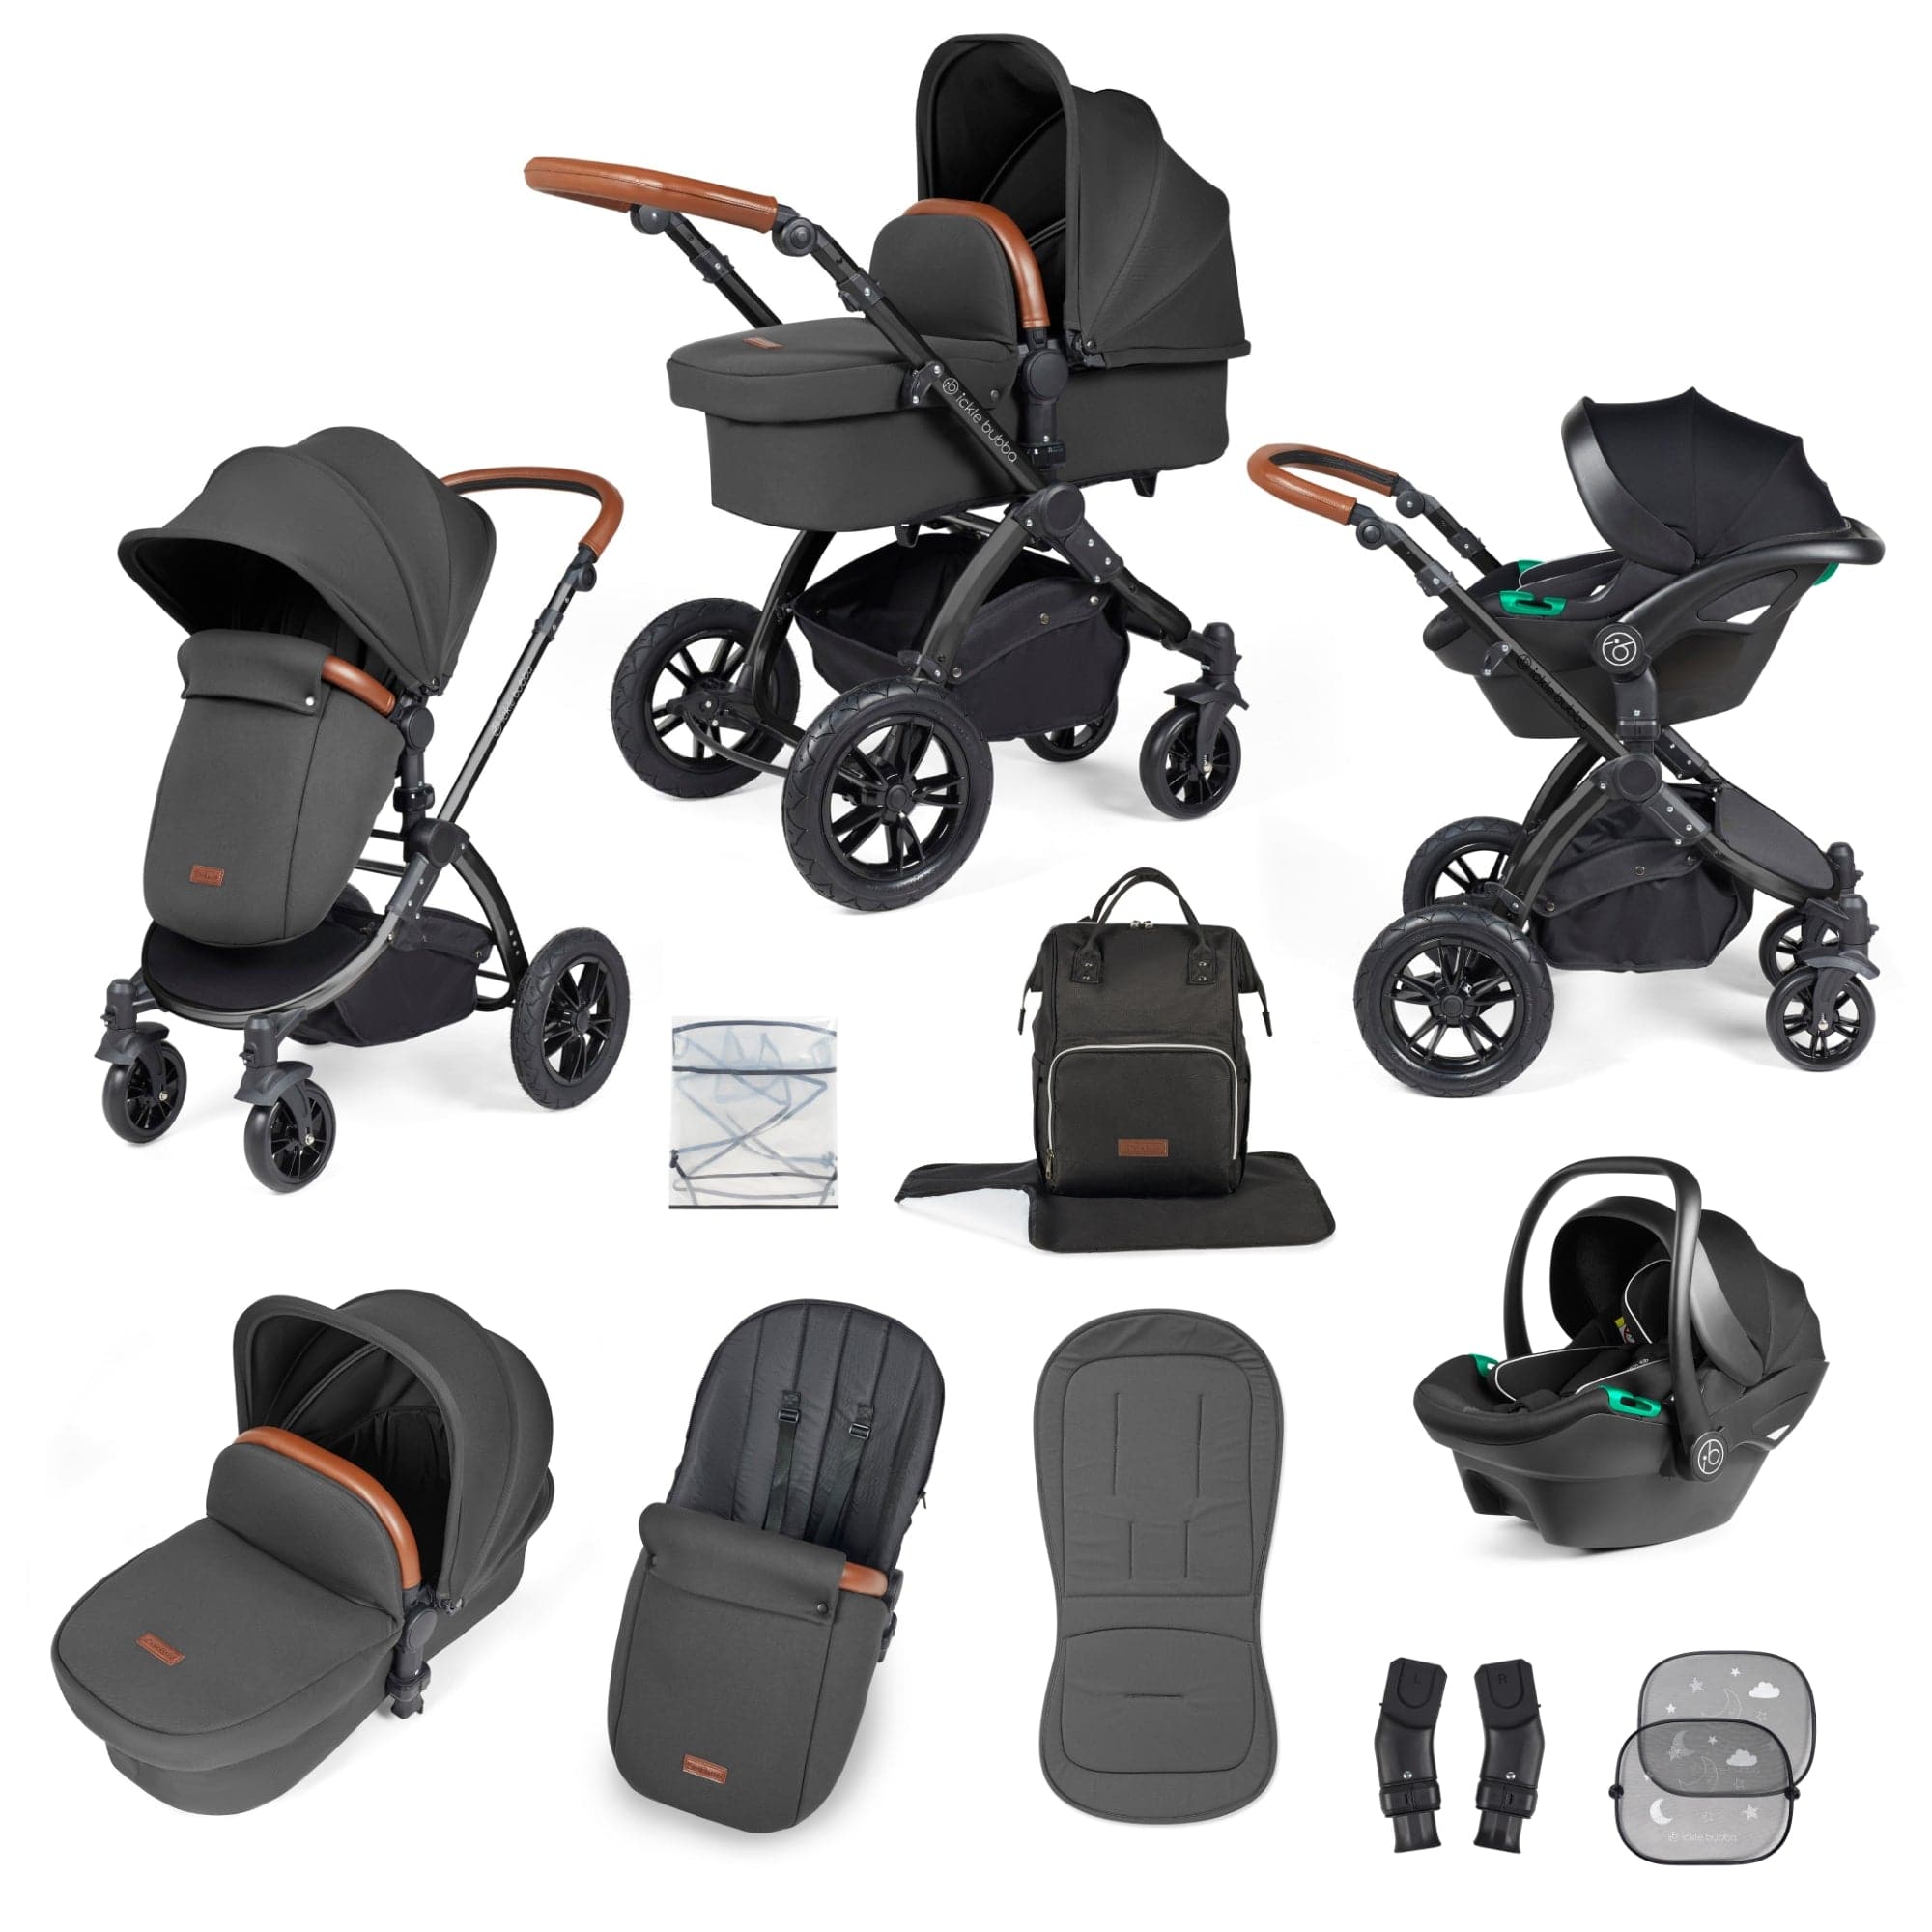 Ickle Bubba Stomp Luxe All-in-One I-Size Travel System With Isofix Base - Black / Charcoal Grey / Tan   